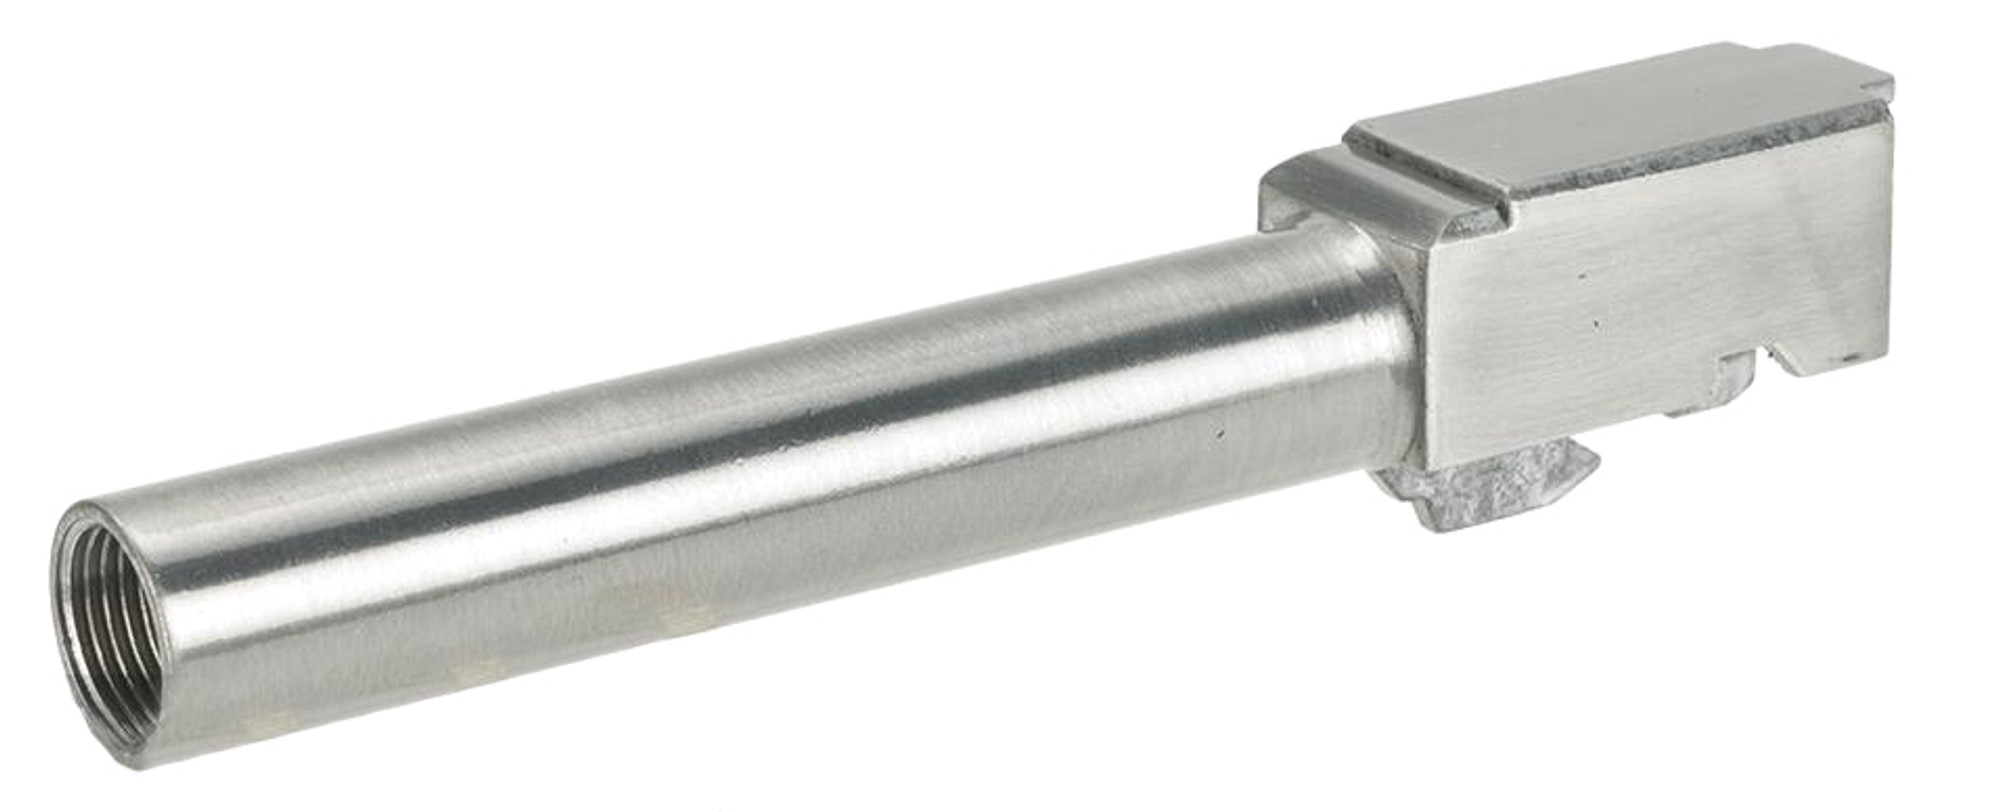 Metal Outer Barrel for APS ACP Series Airsoft Gas Blowback GBB Pistols - Stainless